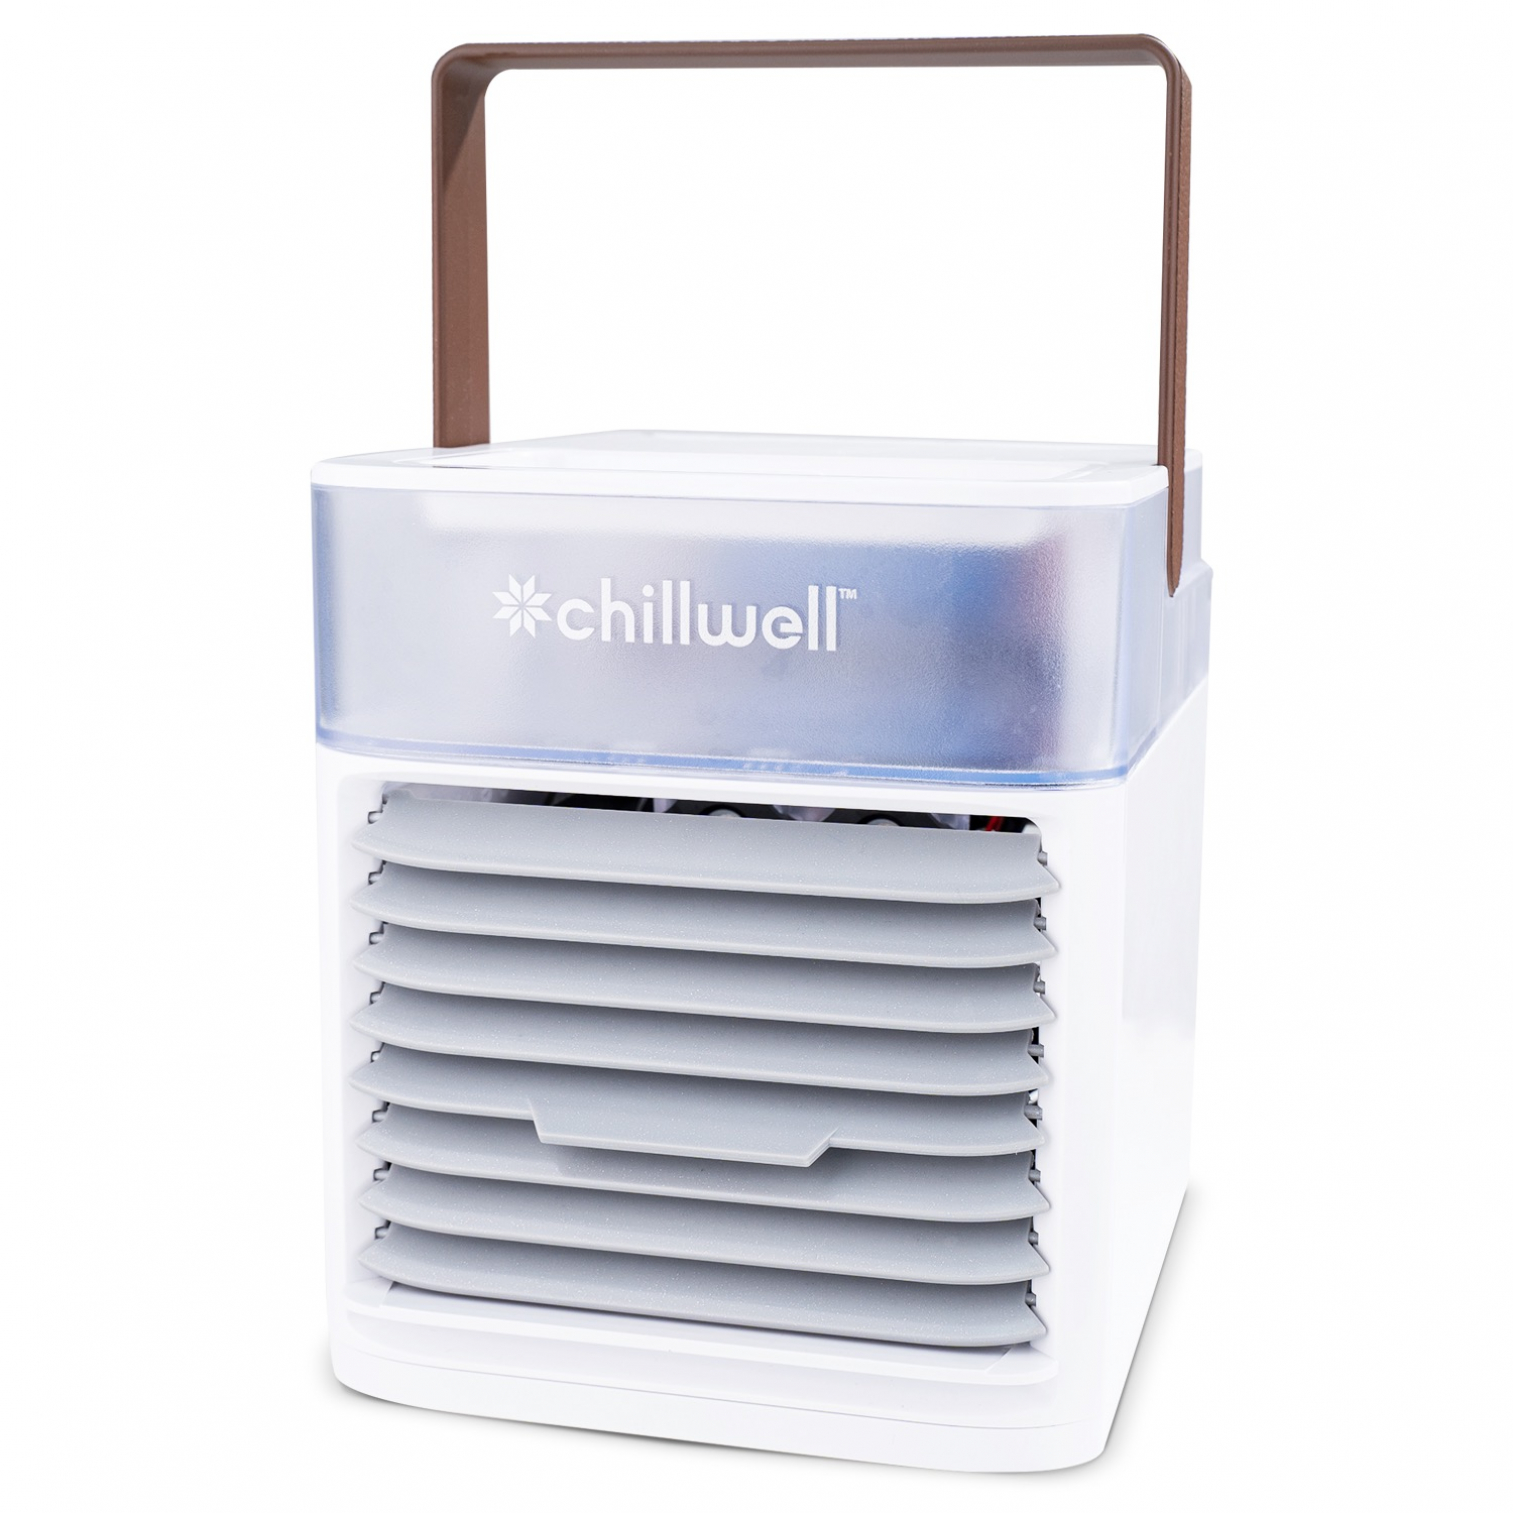 Chillwell Ac Reviews From Customers